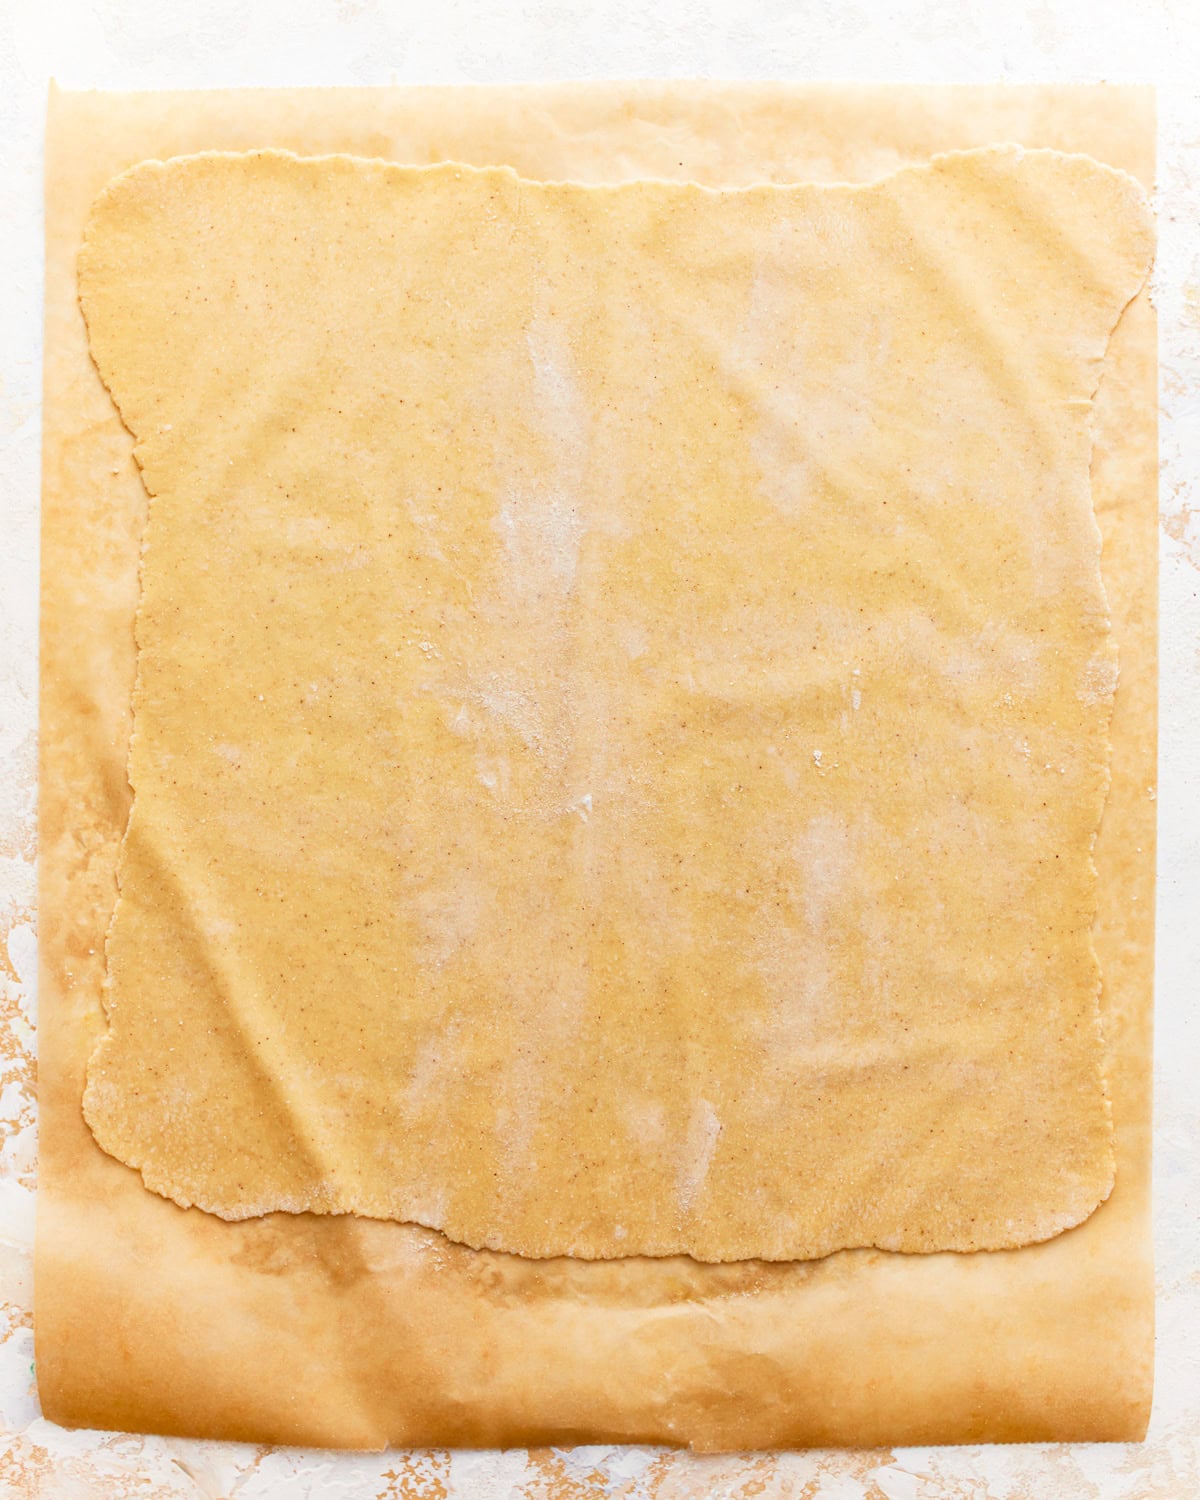 a rolled-out sheet of gluten-free pasta dough.